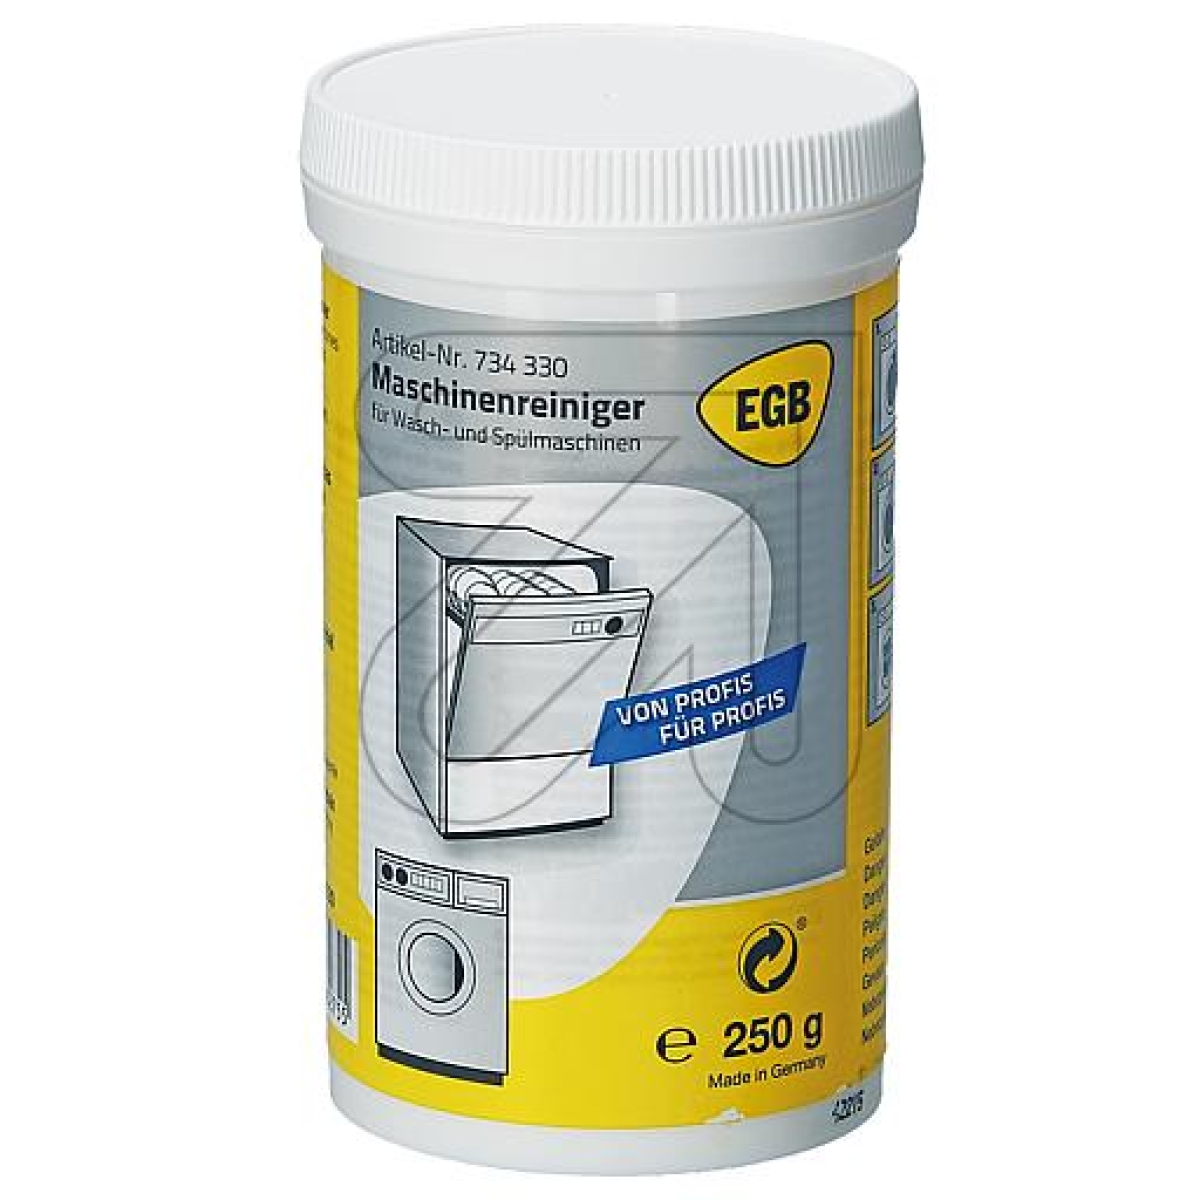 EGBMachine cleaner 250g-Price for 0.2500 kgArticle-No: 734330